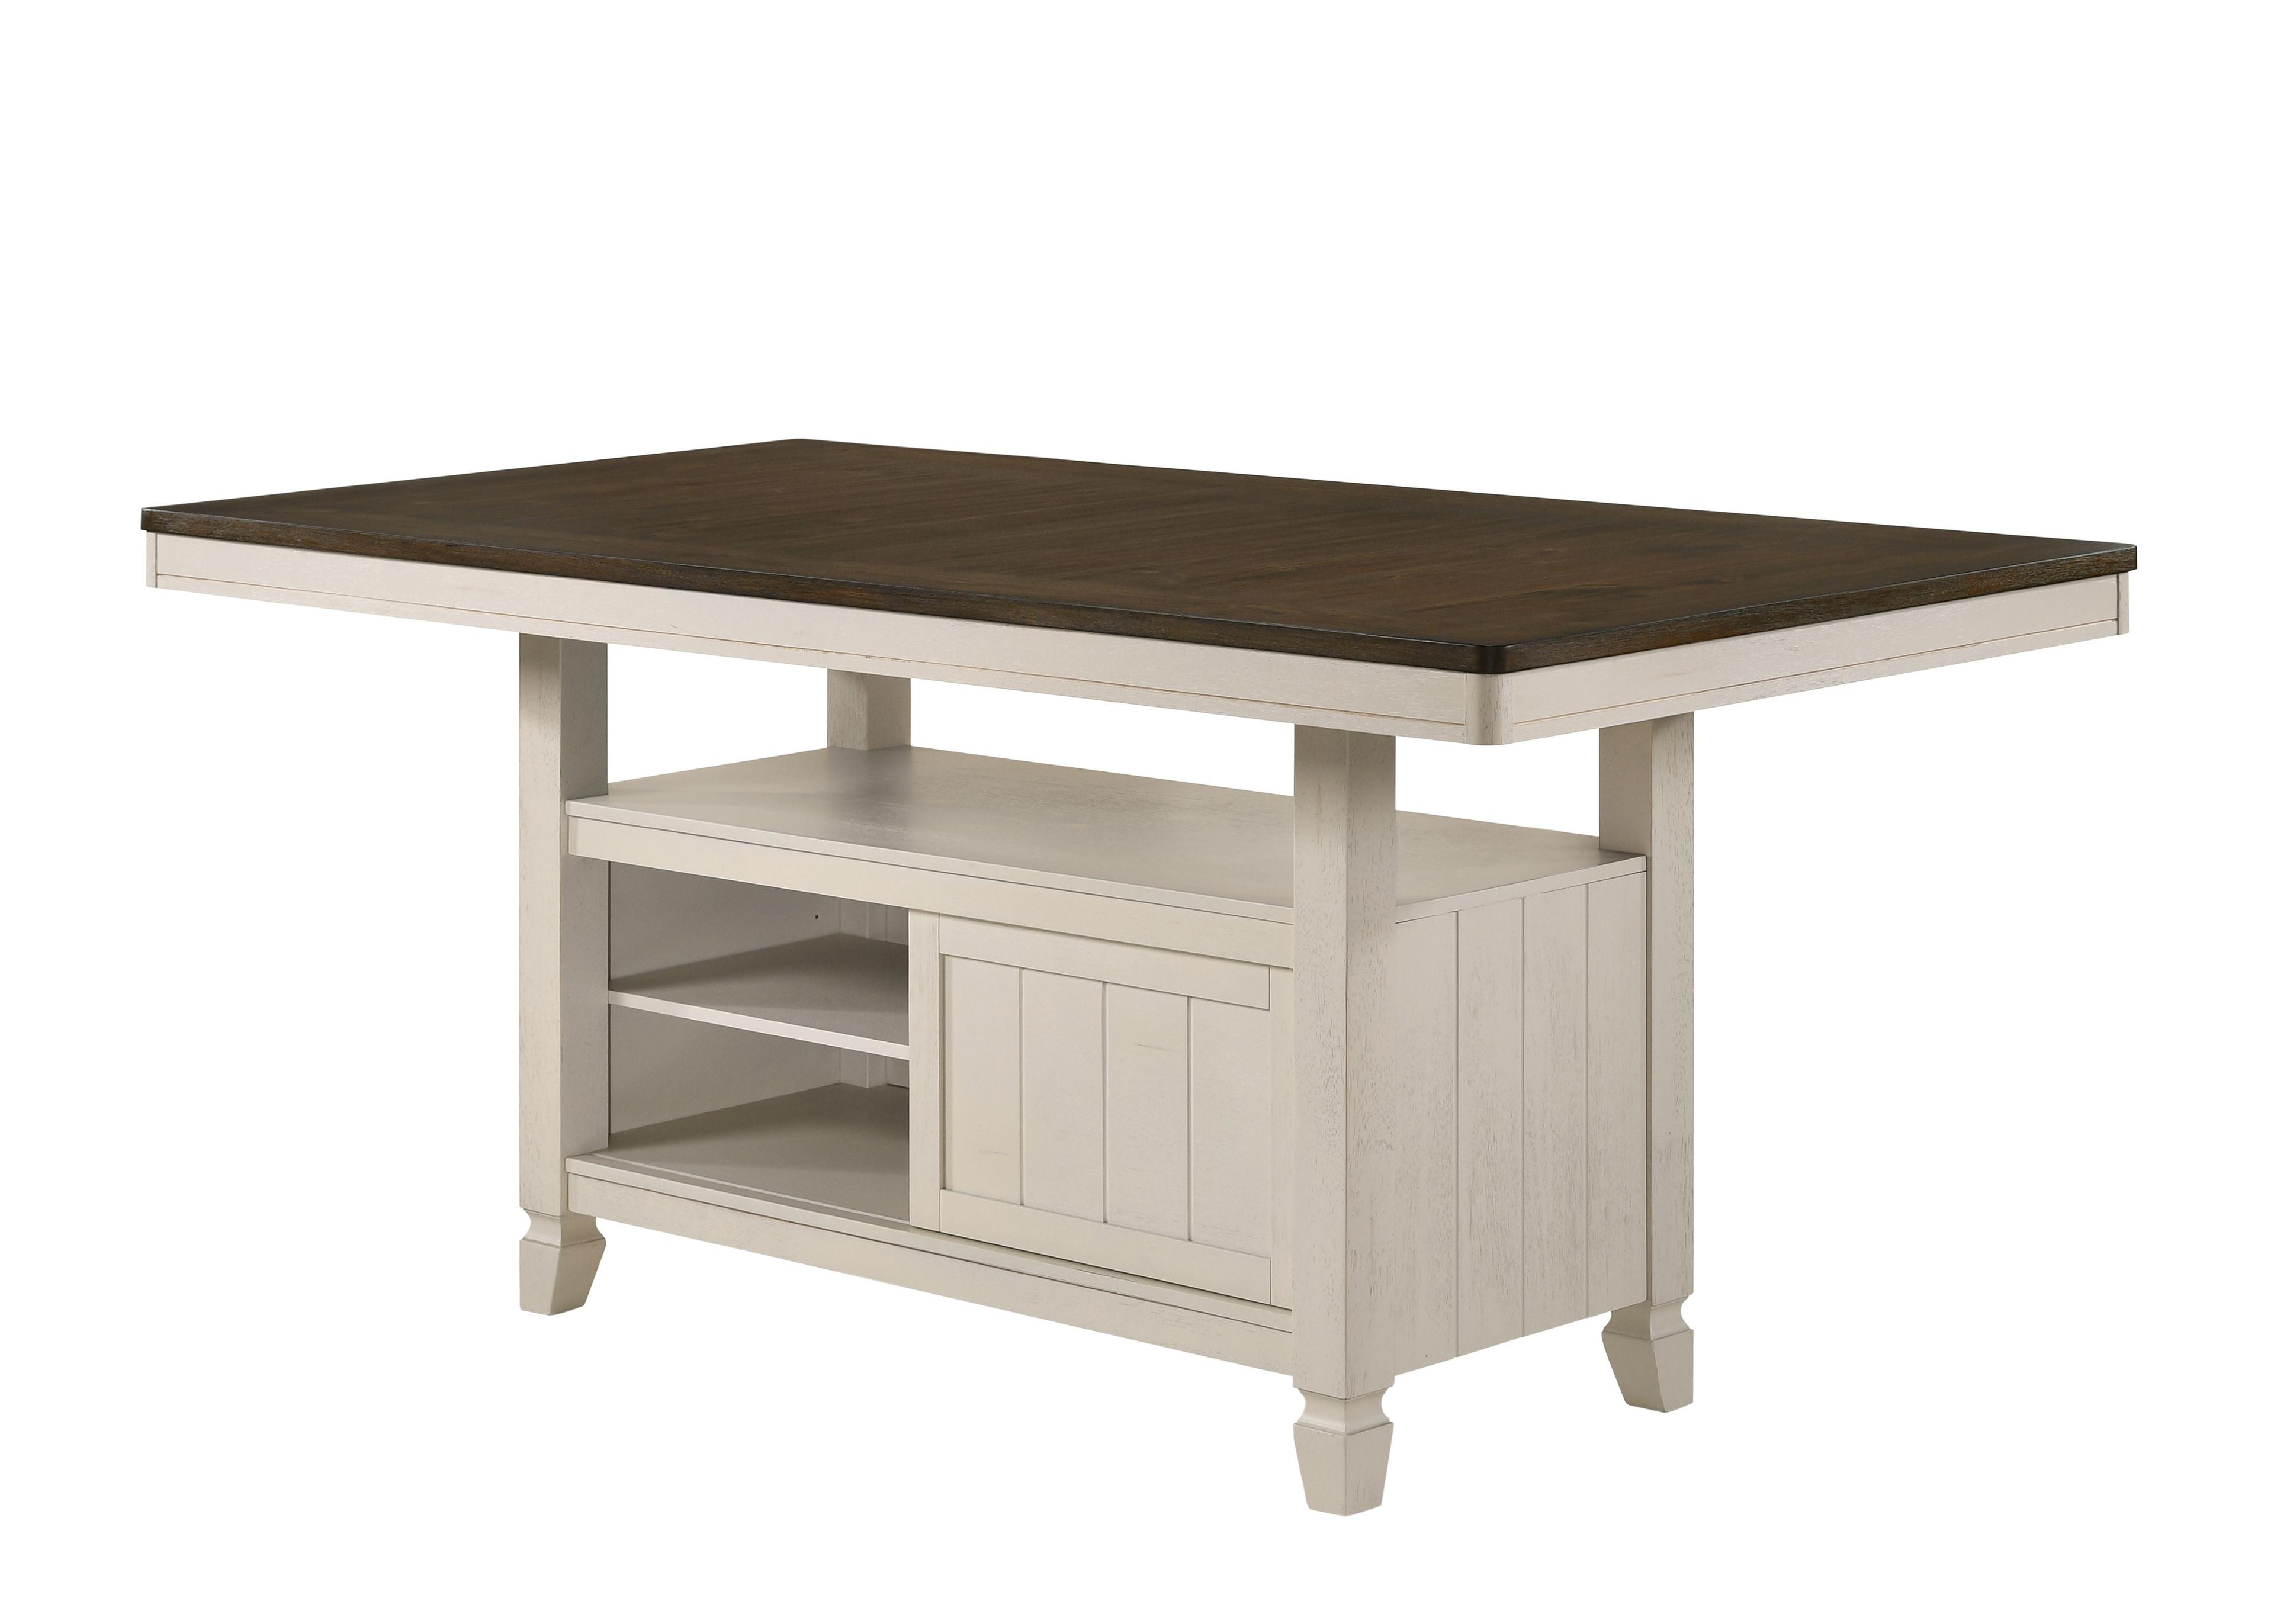 Tasnim 40" Oak and Antique White Wood Counter Height Table